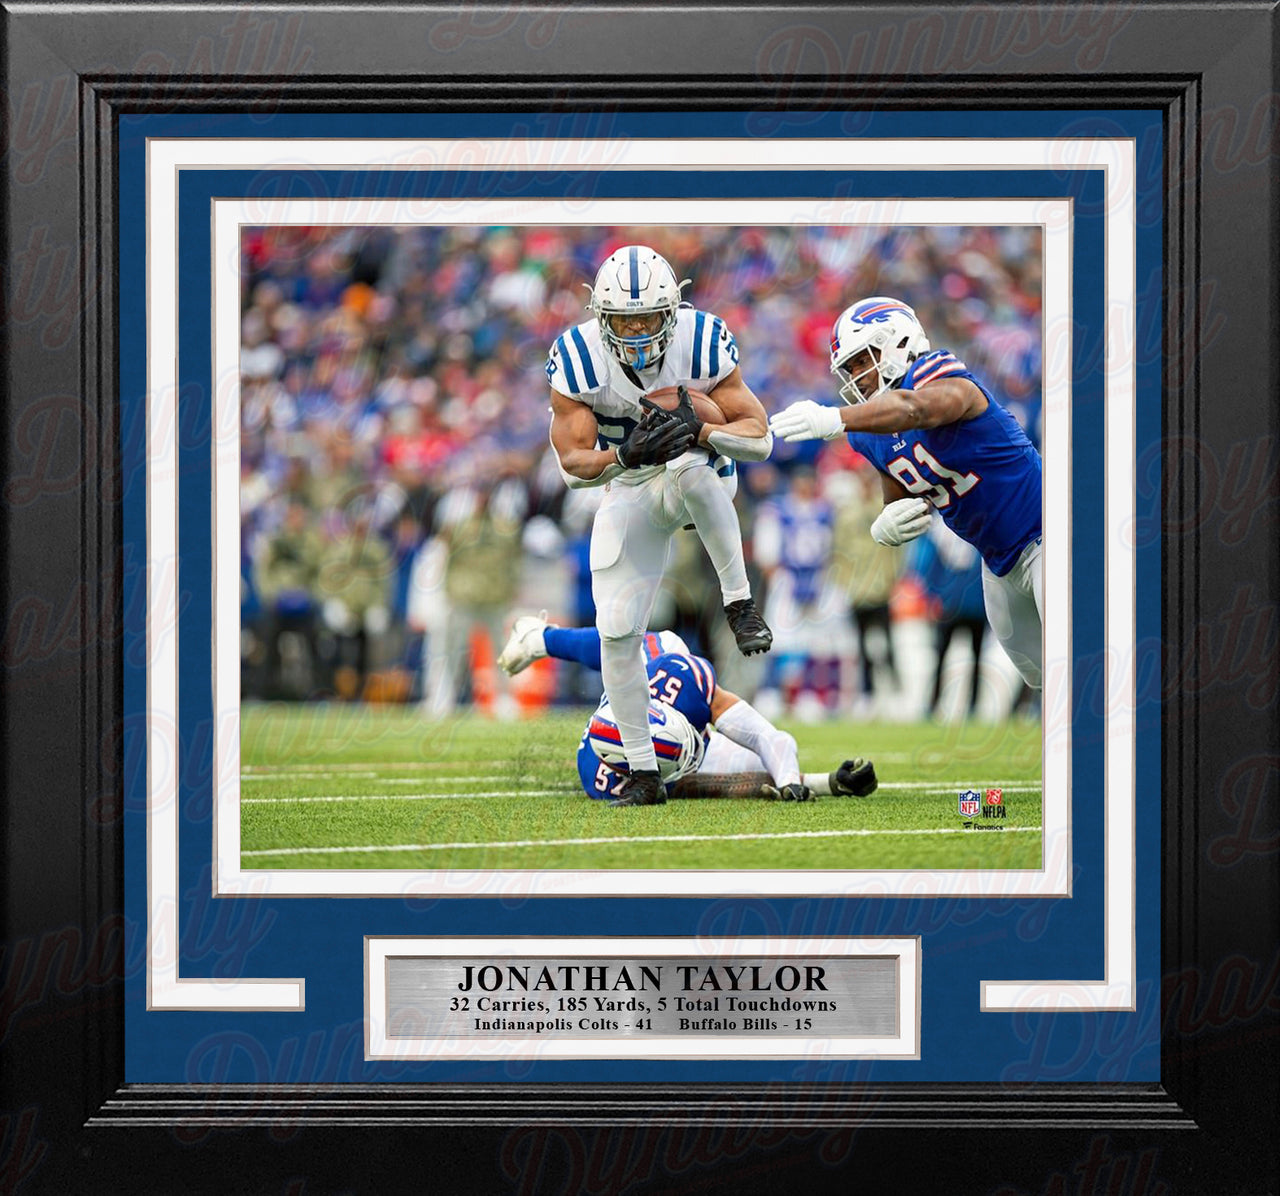 Jonathan Taylor 5 Touchdown Game Indianapolis Colts 8" x 10" Framed Football Photo - Dynasty Sports & Framing 